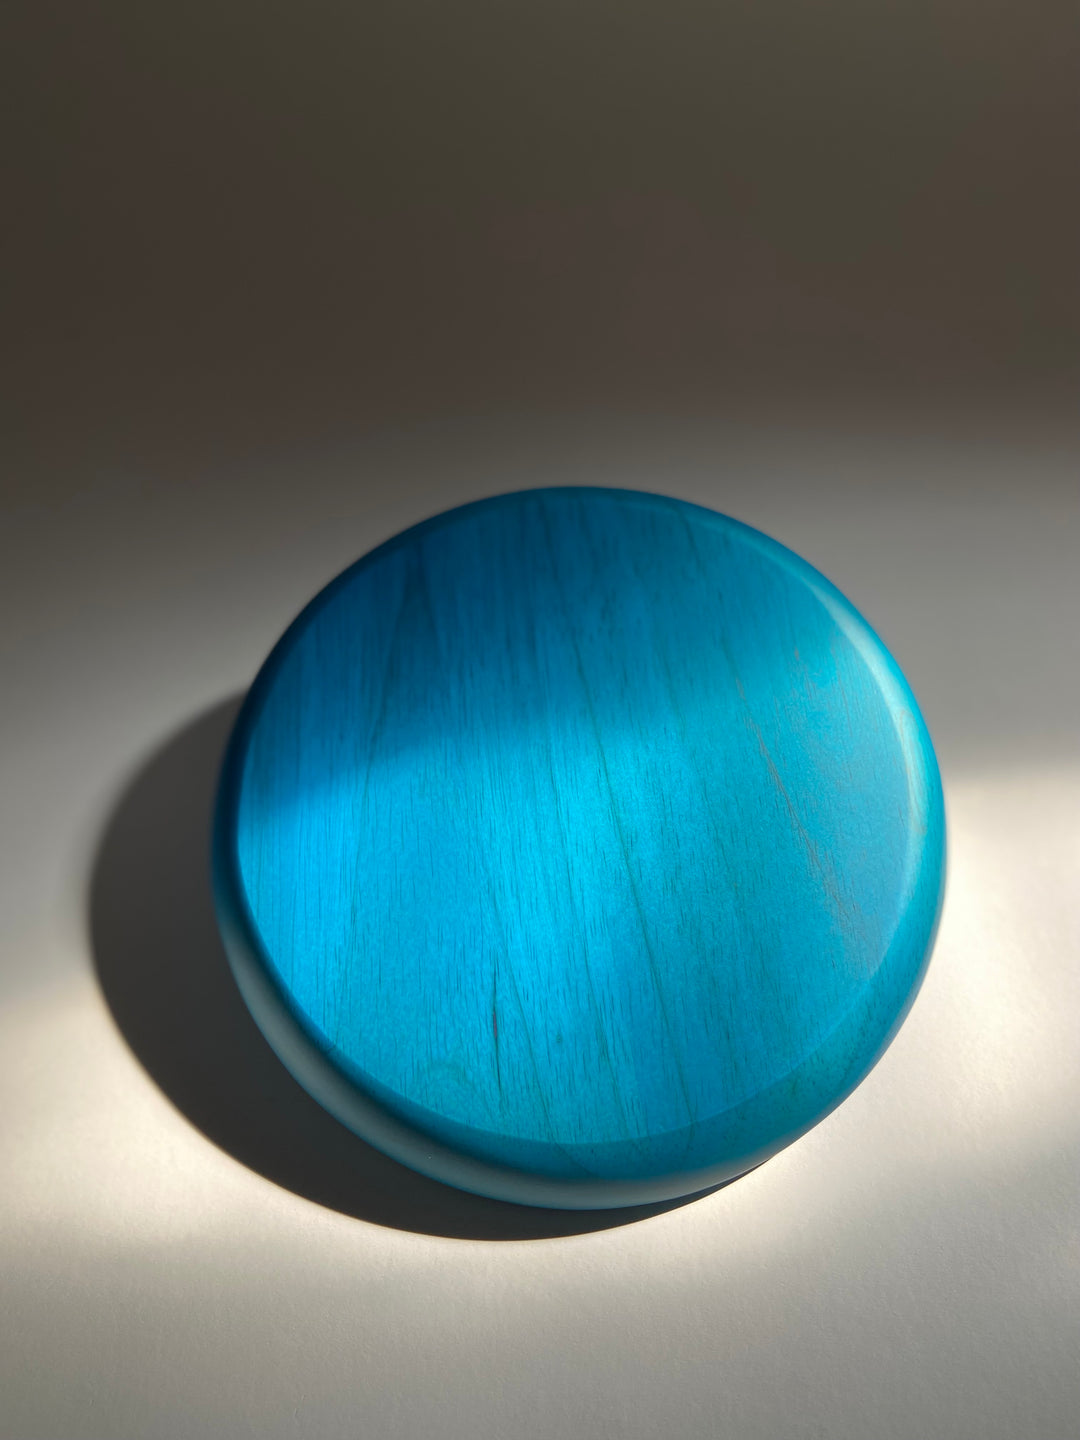 the blue base of the  double sided lacquer plate